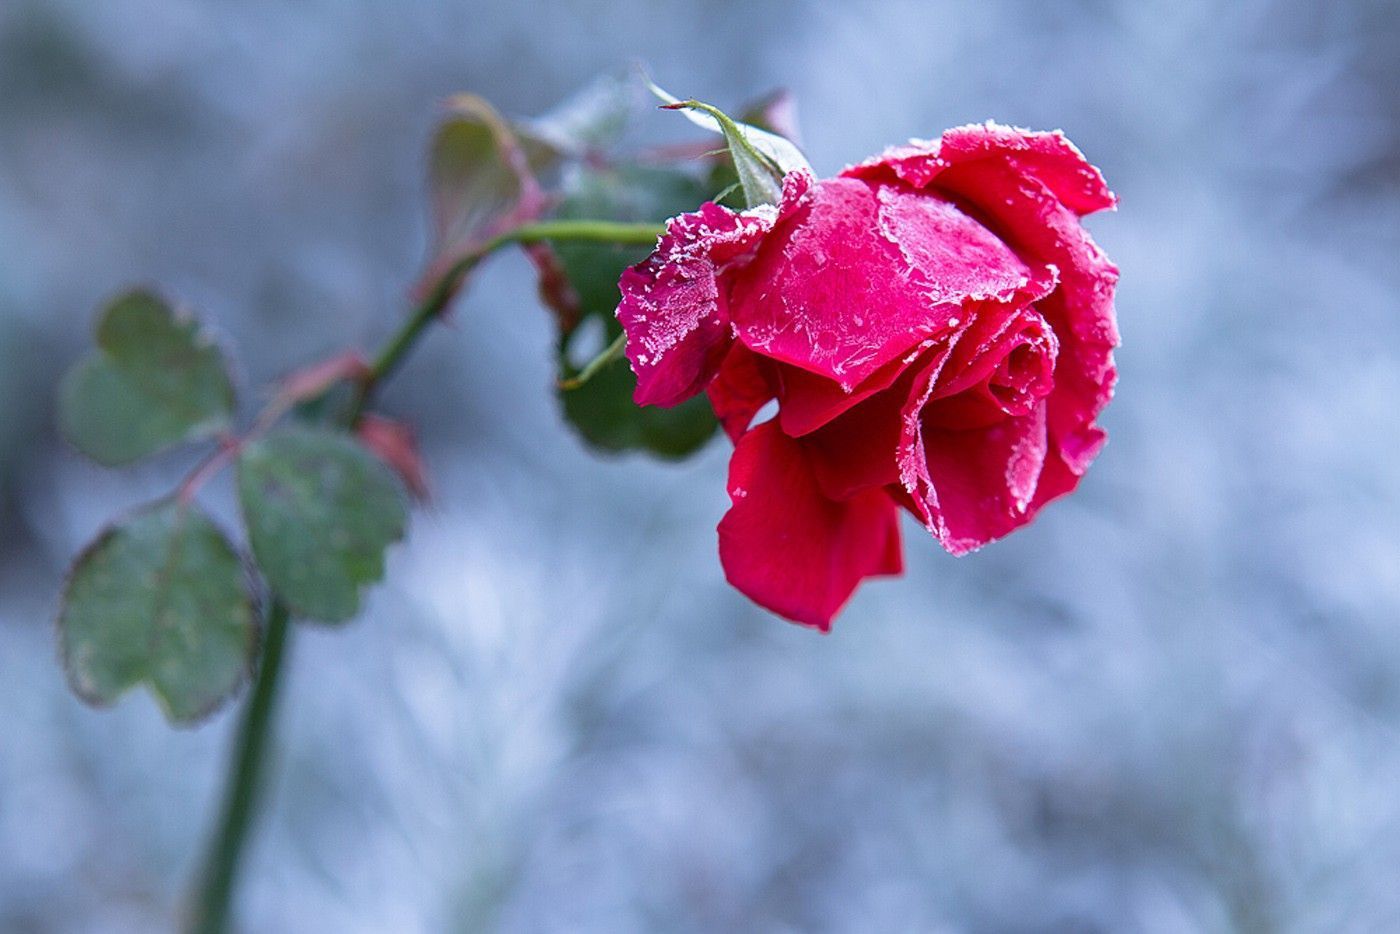 Awesome Winter Rose Flowers Wallpaper HD. Winter flowers, Flower wallpaper, Best flower wallpaper